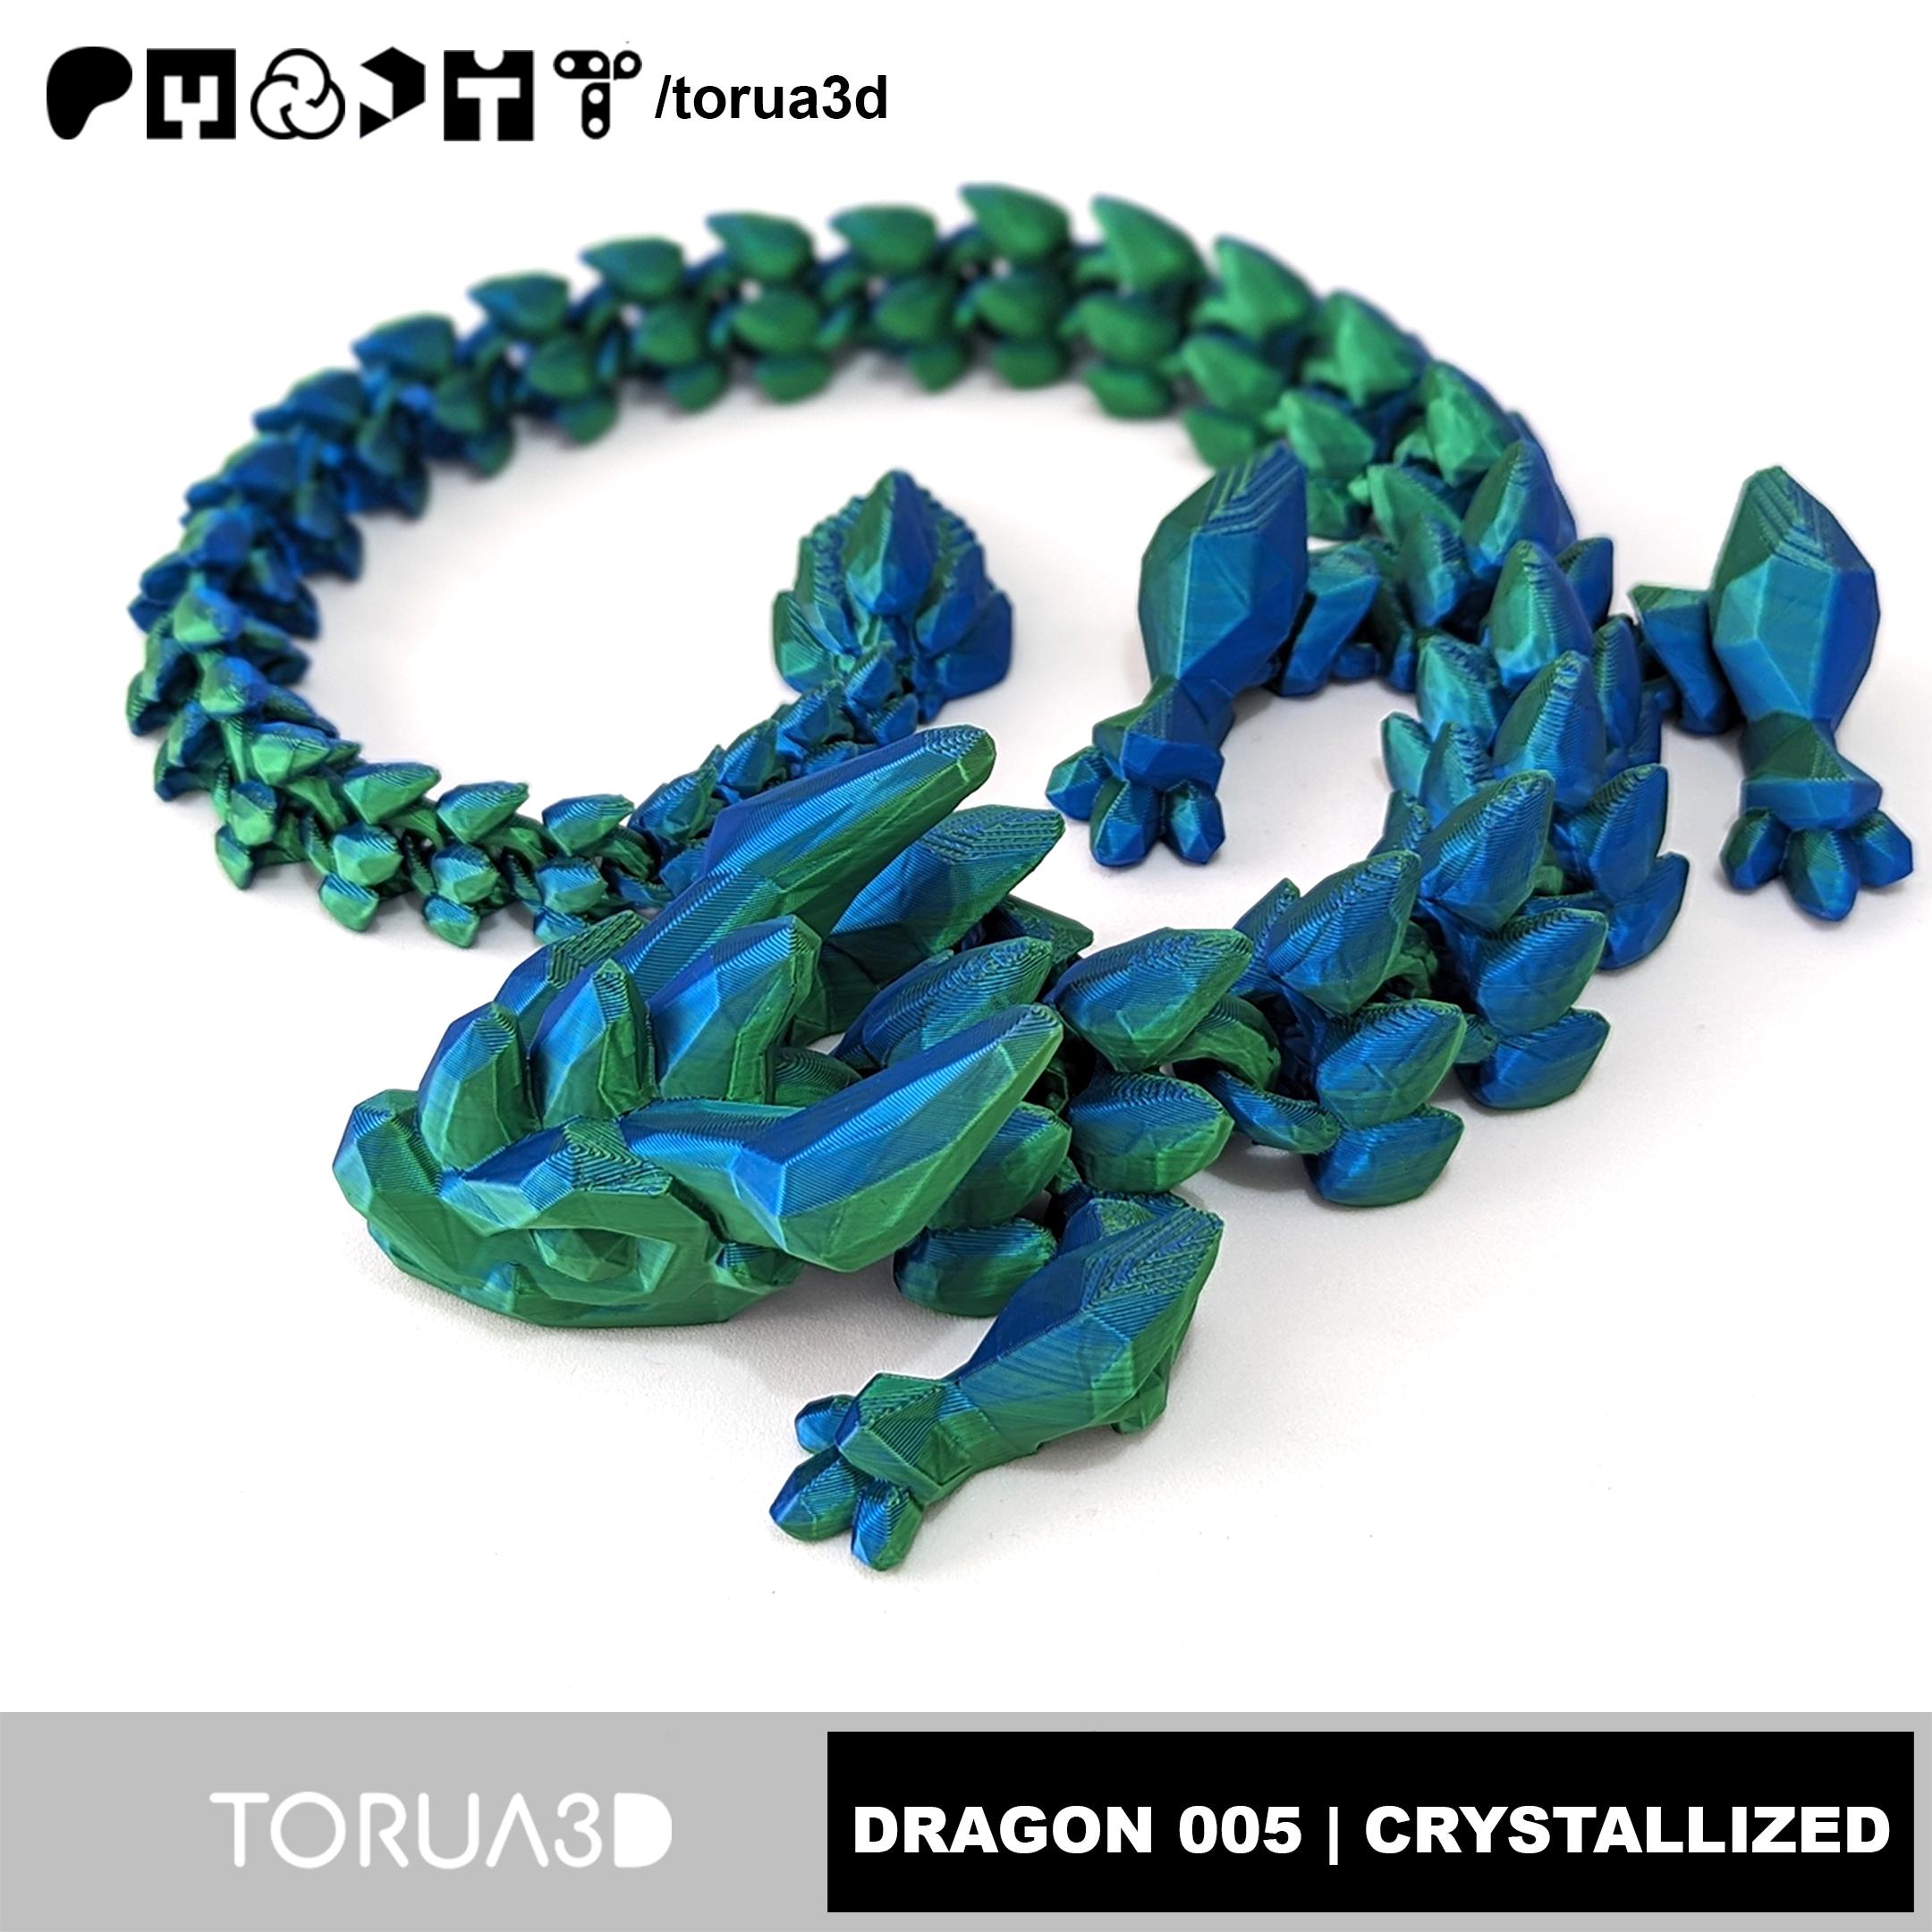 Articulated Dragon 005 - Crystallized - No supports - Print in place - STL 3d model